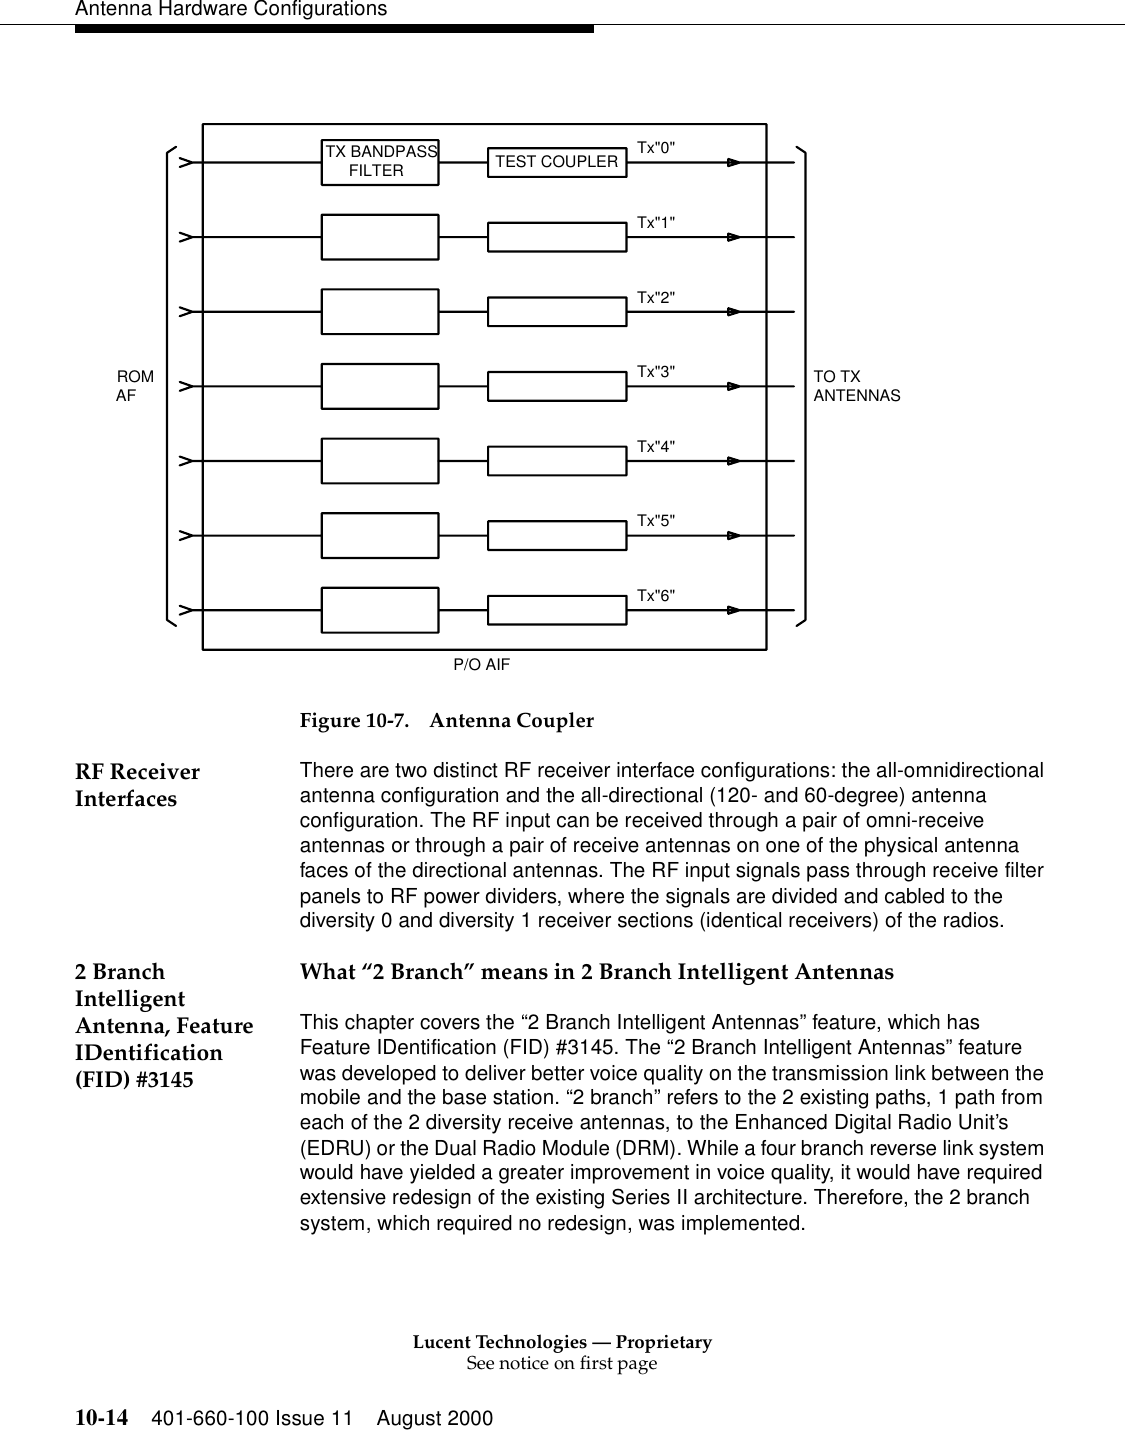 Lucent Technologies — ProprietarySee notice on first page10-14 401-660-100 Issue 11 August 2000Antenna Hardware ConfigurationsFigure 10-7. Antenna CouplerRF Receiver Interfaces There are two distinct RF receiver interface configurations: the all-omnidirectional antenna configuration and the all-directional (120- and 60-degree) antenna configuration. The RF input can be received through a pair of omni-receive antennas or through a pair of receive antennas on one of the physical antenna faces of the directional antennas. The RF input signals pass through receive filter panels to RF power dividers, where the signals are divided and cabled to the diversity 0 and diversity 1 receiver sections (identical receivers) of the radios.2 Branch Intelligent Antenna, Feature IDentification (FID) #3145What “2 Branch” means in 2 Branch Intelligent AntennasThis chapter covers the “2 Branch Intelligent Antennas” feature, which has Feature IDentification (FID) #3145. The “2 Branch Intelligent Antennas” feature was developed to deliver better voice quality on the transmission link between the mobile and the base station. “2 branch” refers to the 2 existing paths, 1 path from each of the 2 diversity receive antennas, to the Enhanced Digital Radio Unit’s (EDRU) or the Dual Radio Module (DRM). While a four branch reverse link system would have yielded a greater improvement in voice quality, it would have required extensive redesign of the existing Series II architecture. Therefore, the 2 branch system, which required no redesign, was implemented. P/O AIFANTENNASTO TXTx&quot;6&quot;Tx&quot;5&quot;Tx&quot;4&quot;Tx&quot;3&quot;Tx&quot;2&quot;Tx&quot;1&quot;Tx&quot;0&quot;FILTERTX BANDPASS TEST COUPLERAFROM